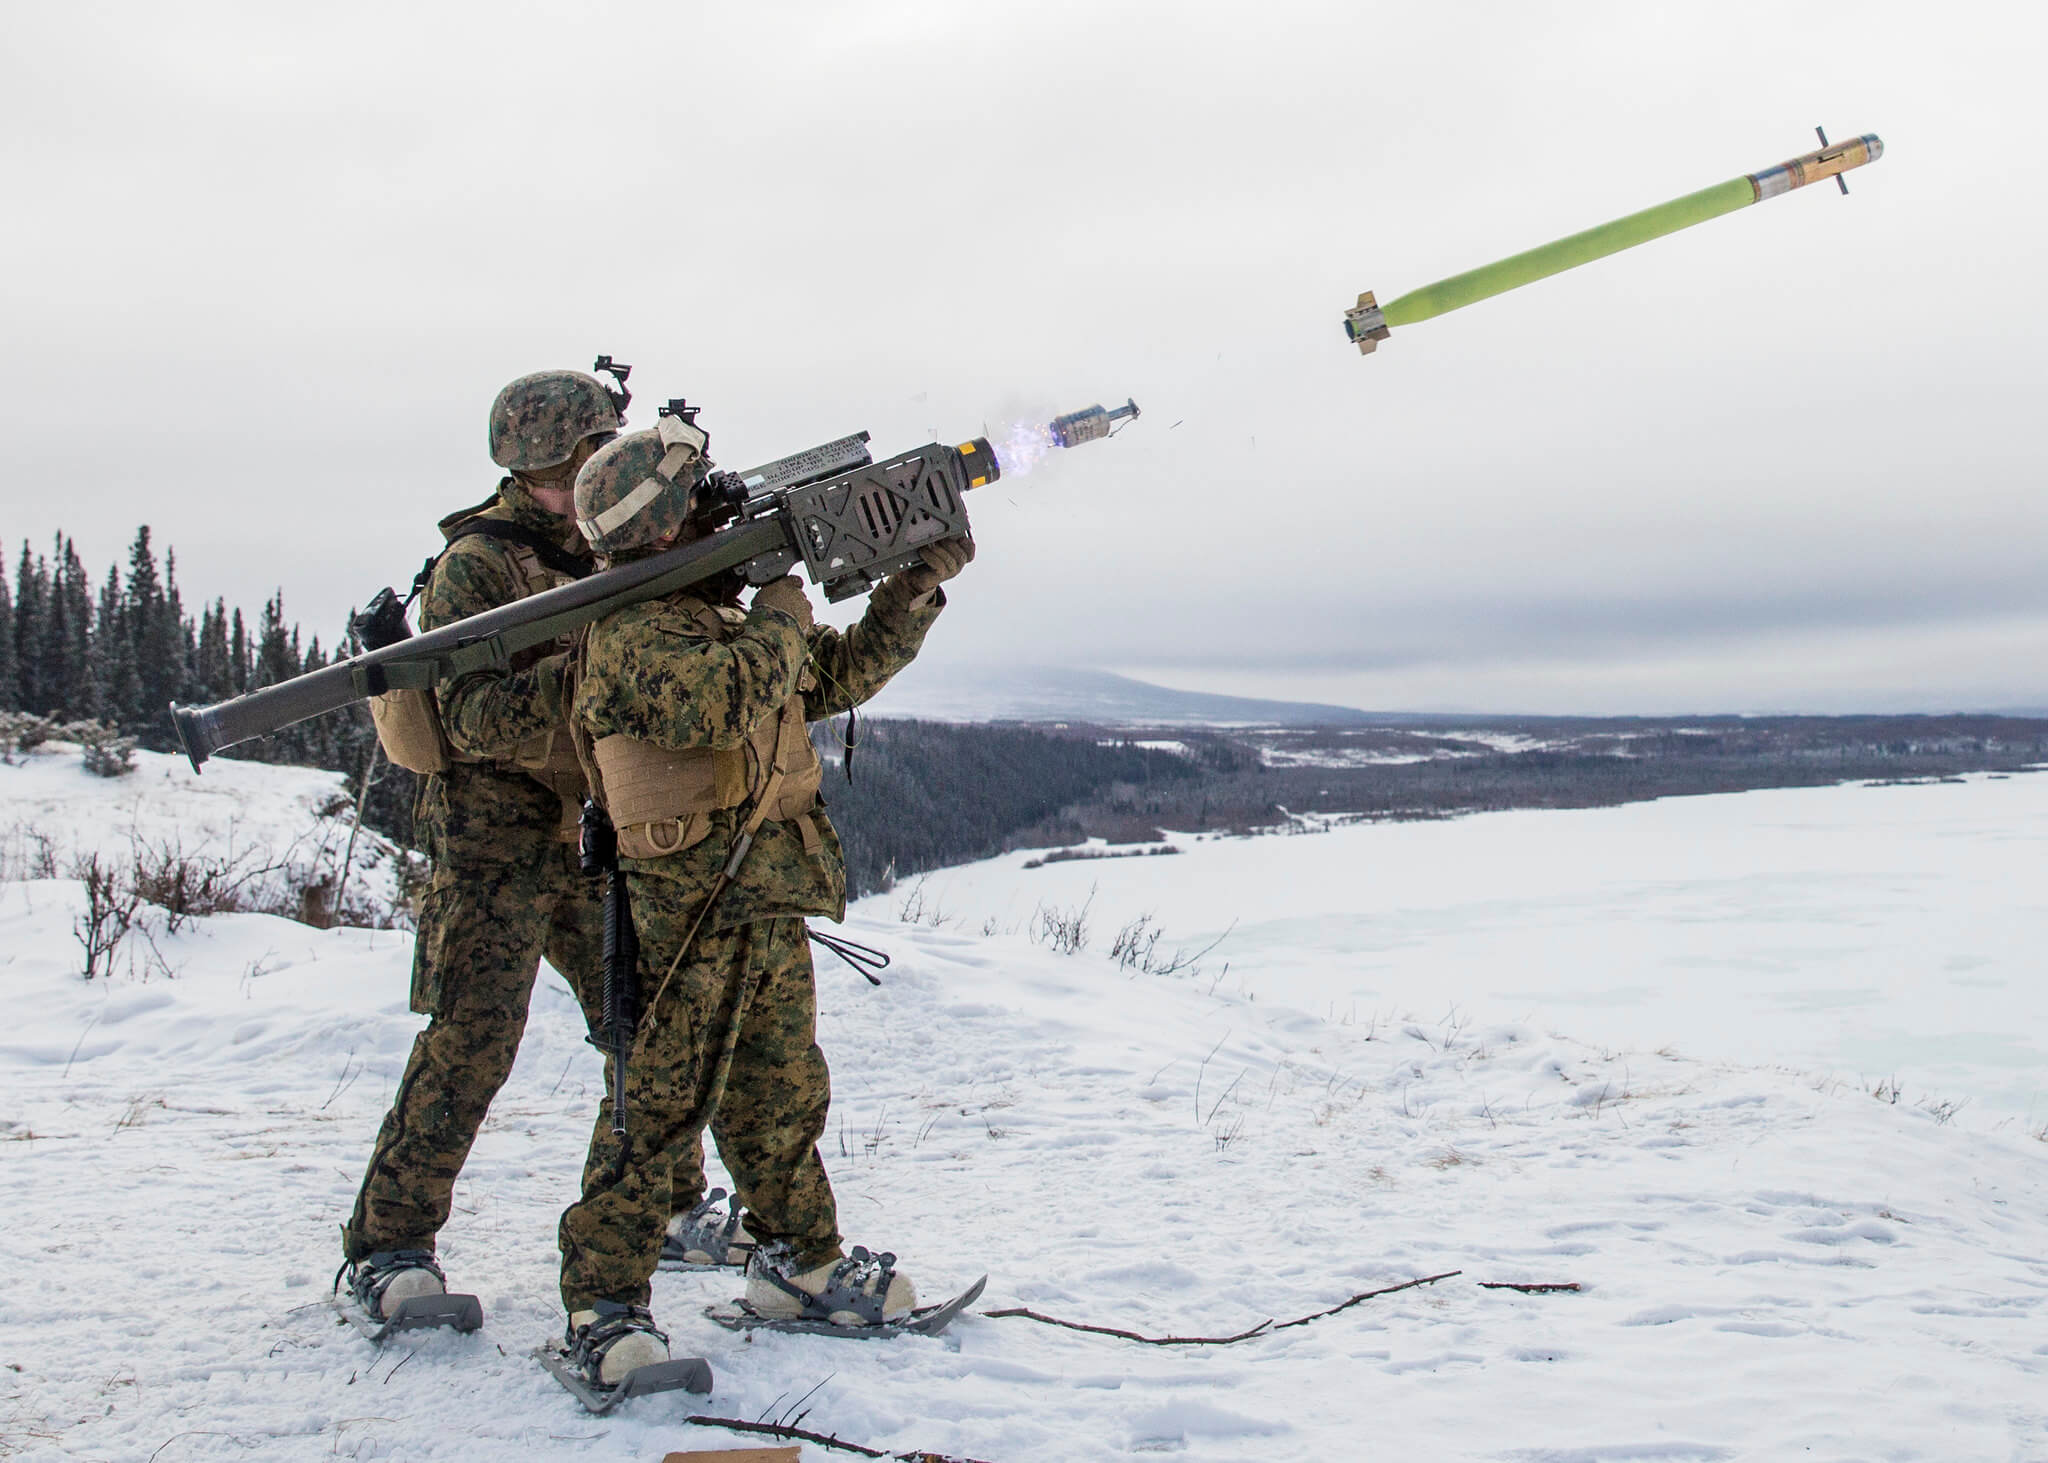 Tack - U.S. Marines fire an FIM-92 Stinger missile during exercise in 2018. U.S. Indo-Pacific Command